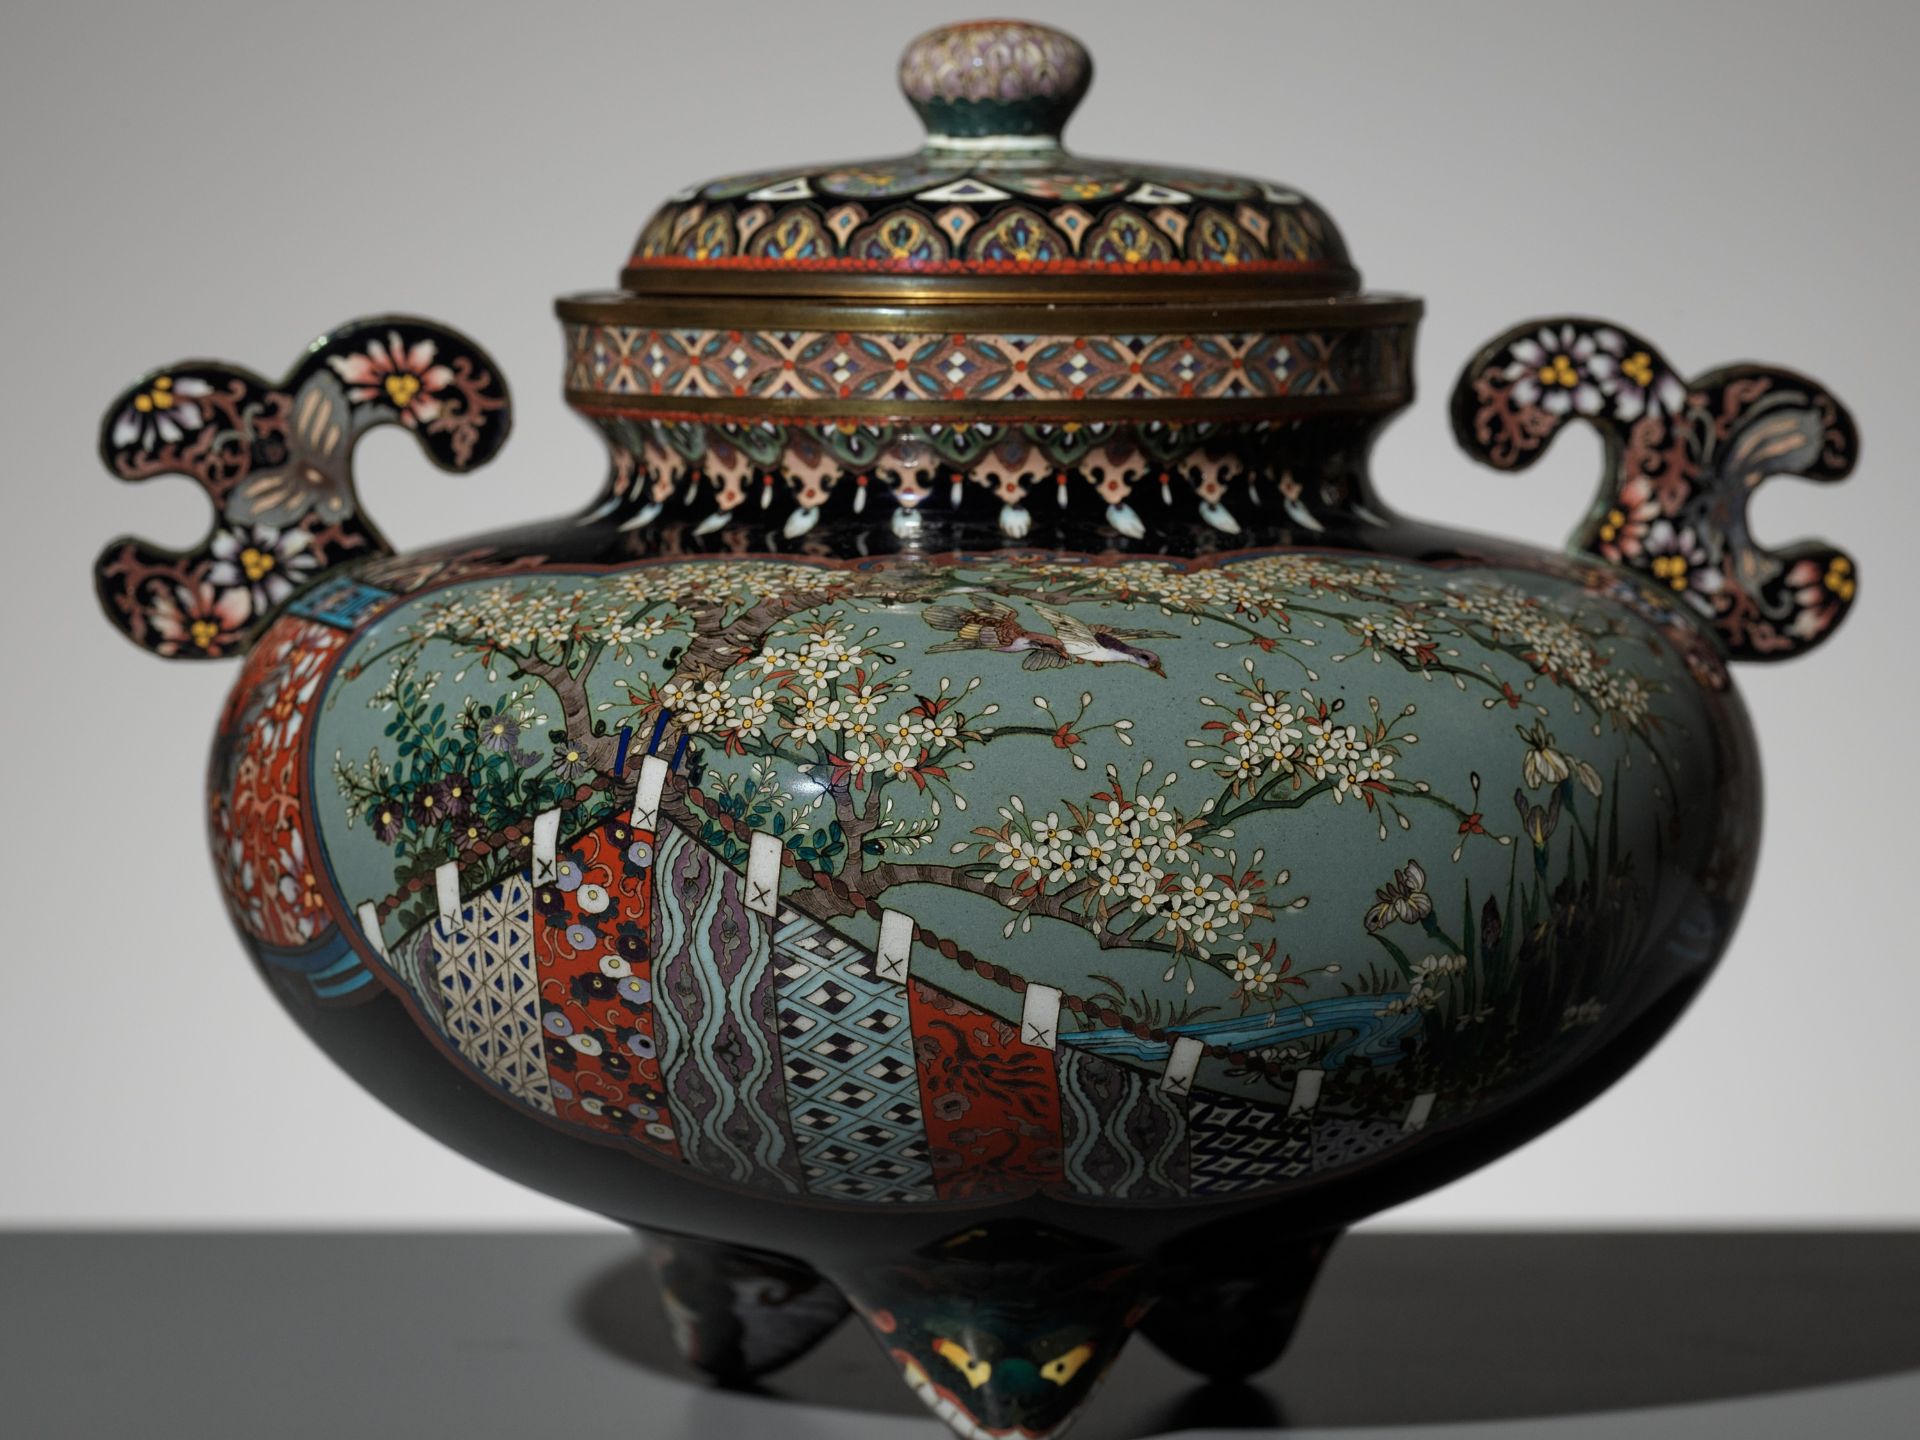 A FINE CLOISONNÃ‰ KORO (INCENSE BURNER) AND COVER, STYLE OF HAYASHI KODENJI - Image 6 of 11